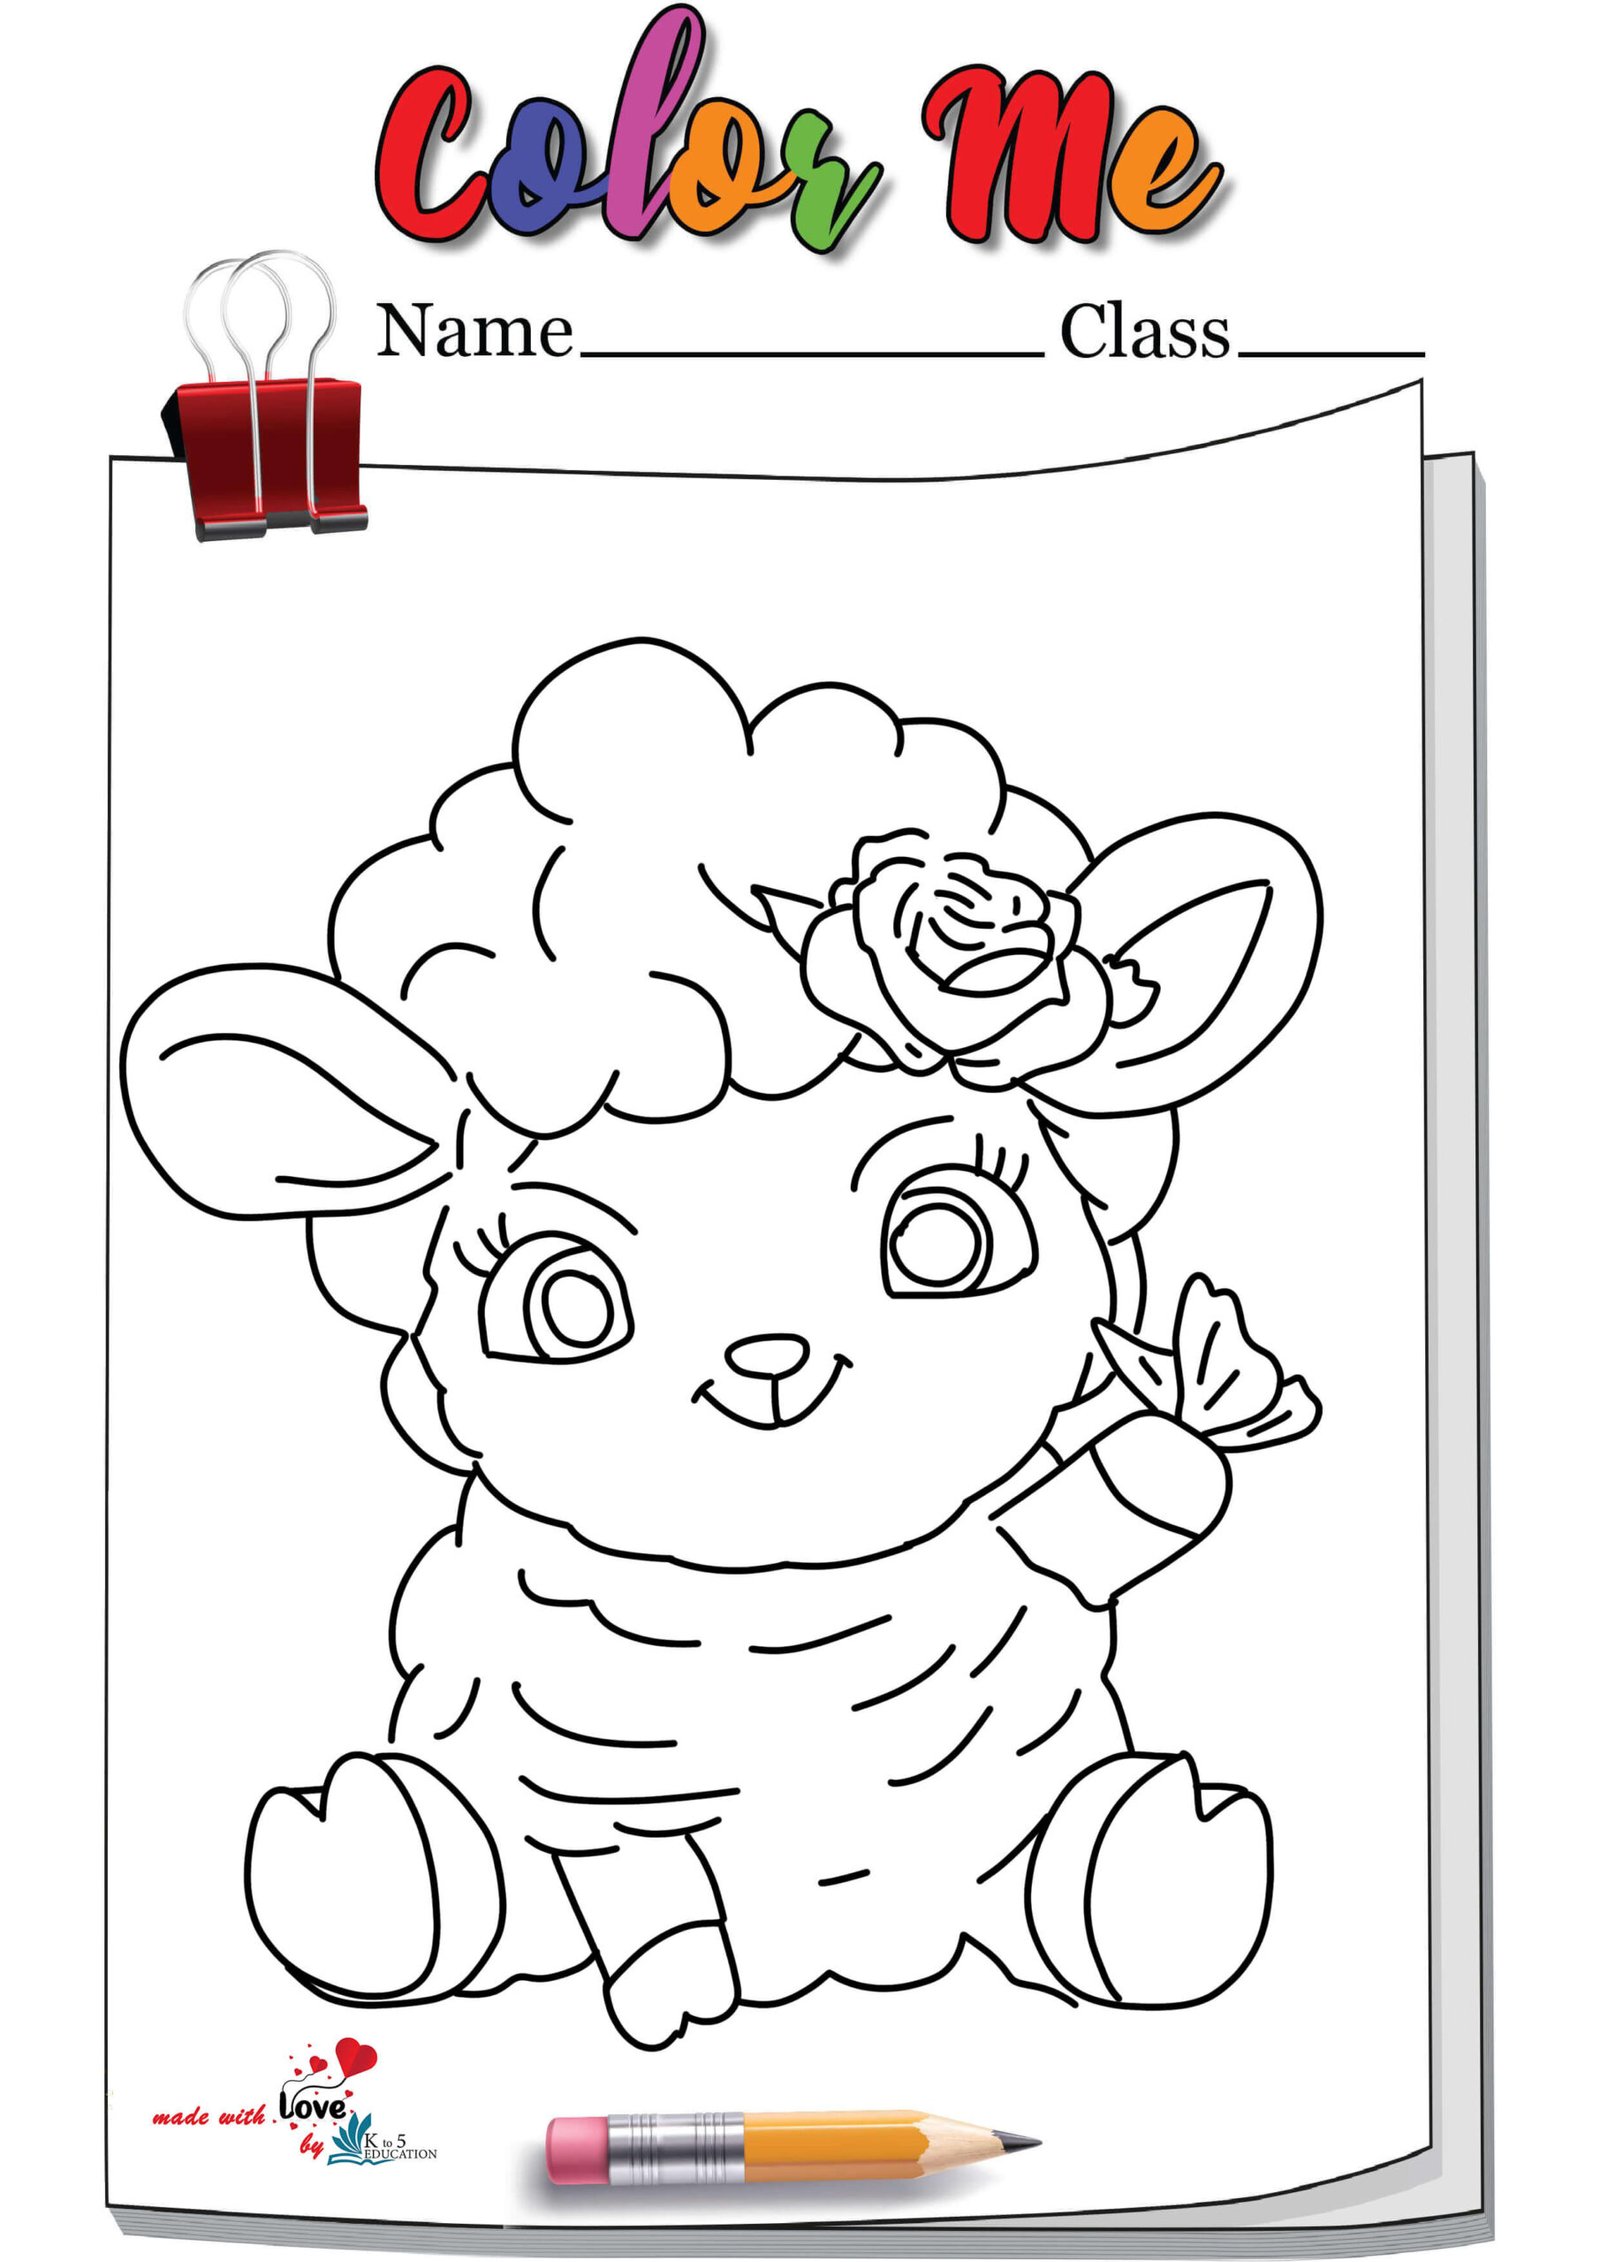 Cute Sheep Coloring Page